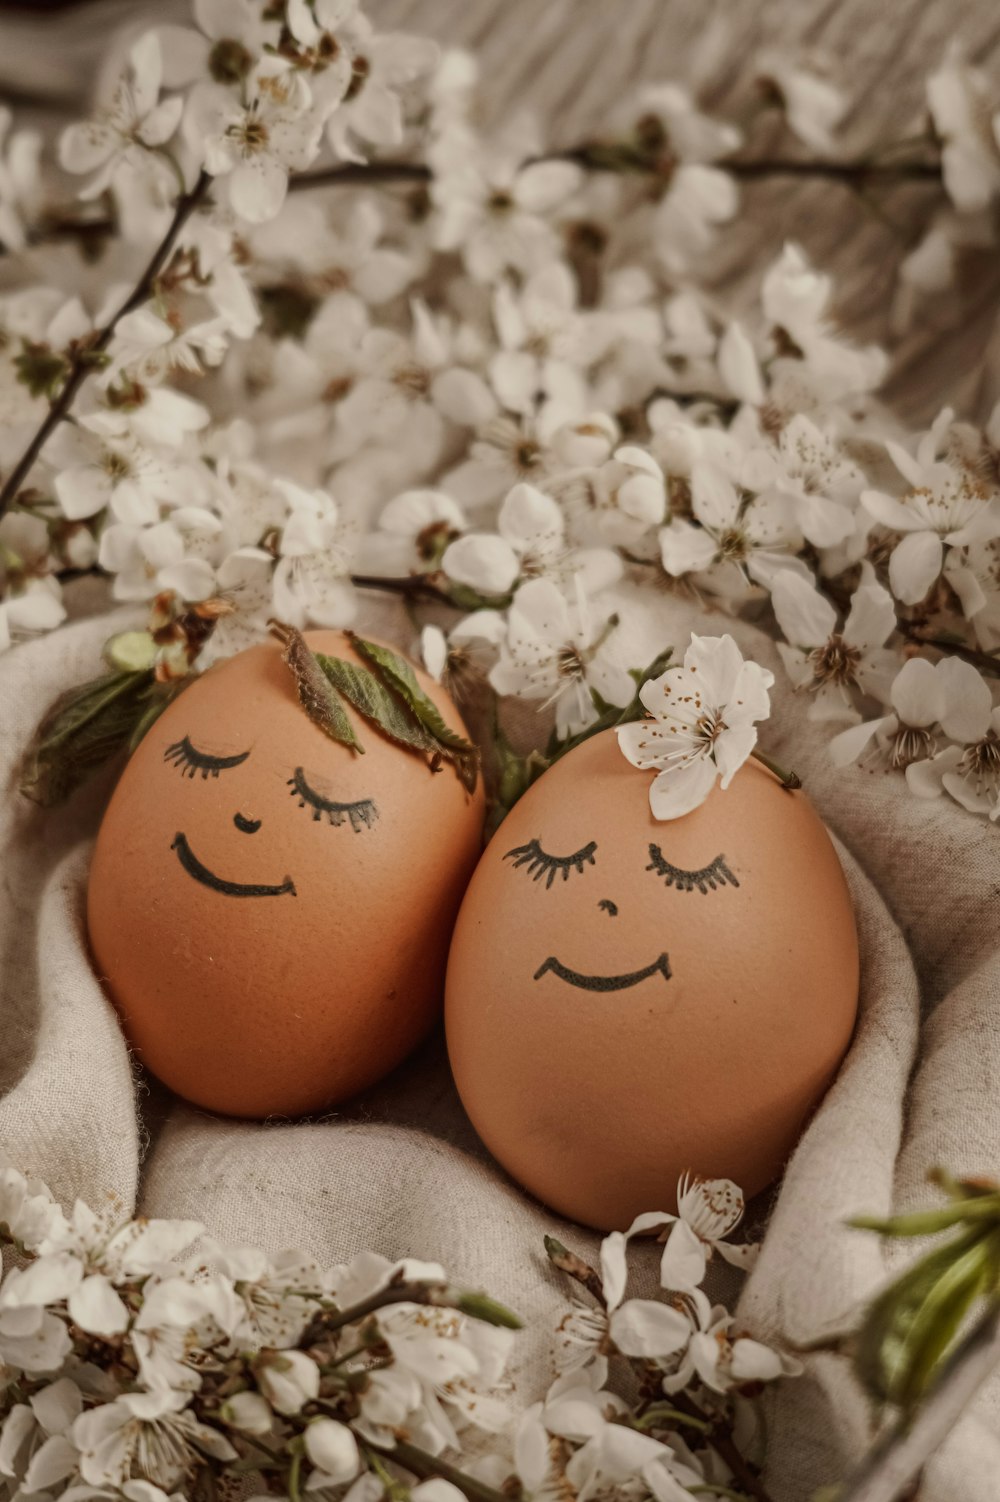 two eggs with faces drawn on them sitting next to each other